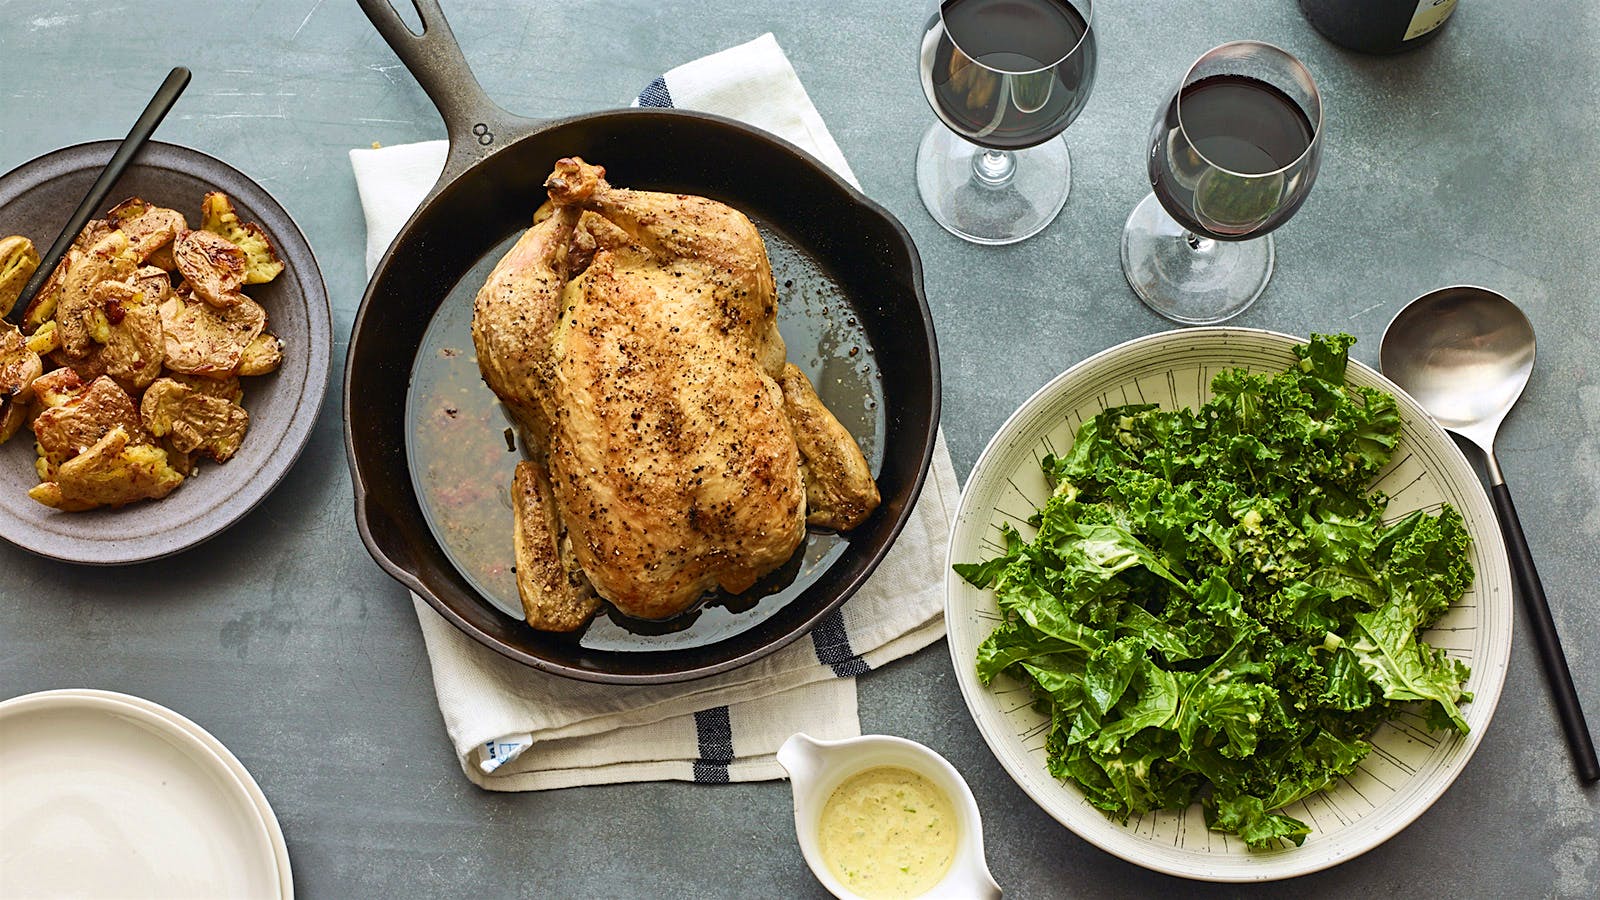 Perfect Match Recipe: Roast Chicken with Crispy Potatoes, Kale and Grilled-Scallion Vinaigrette